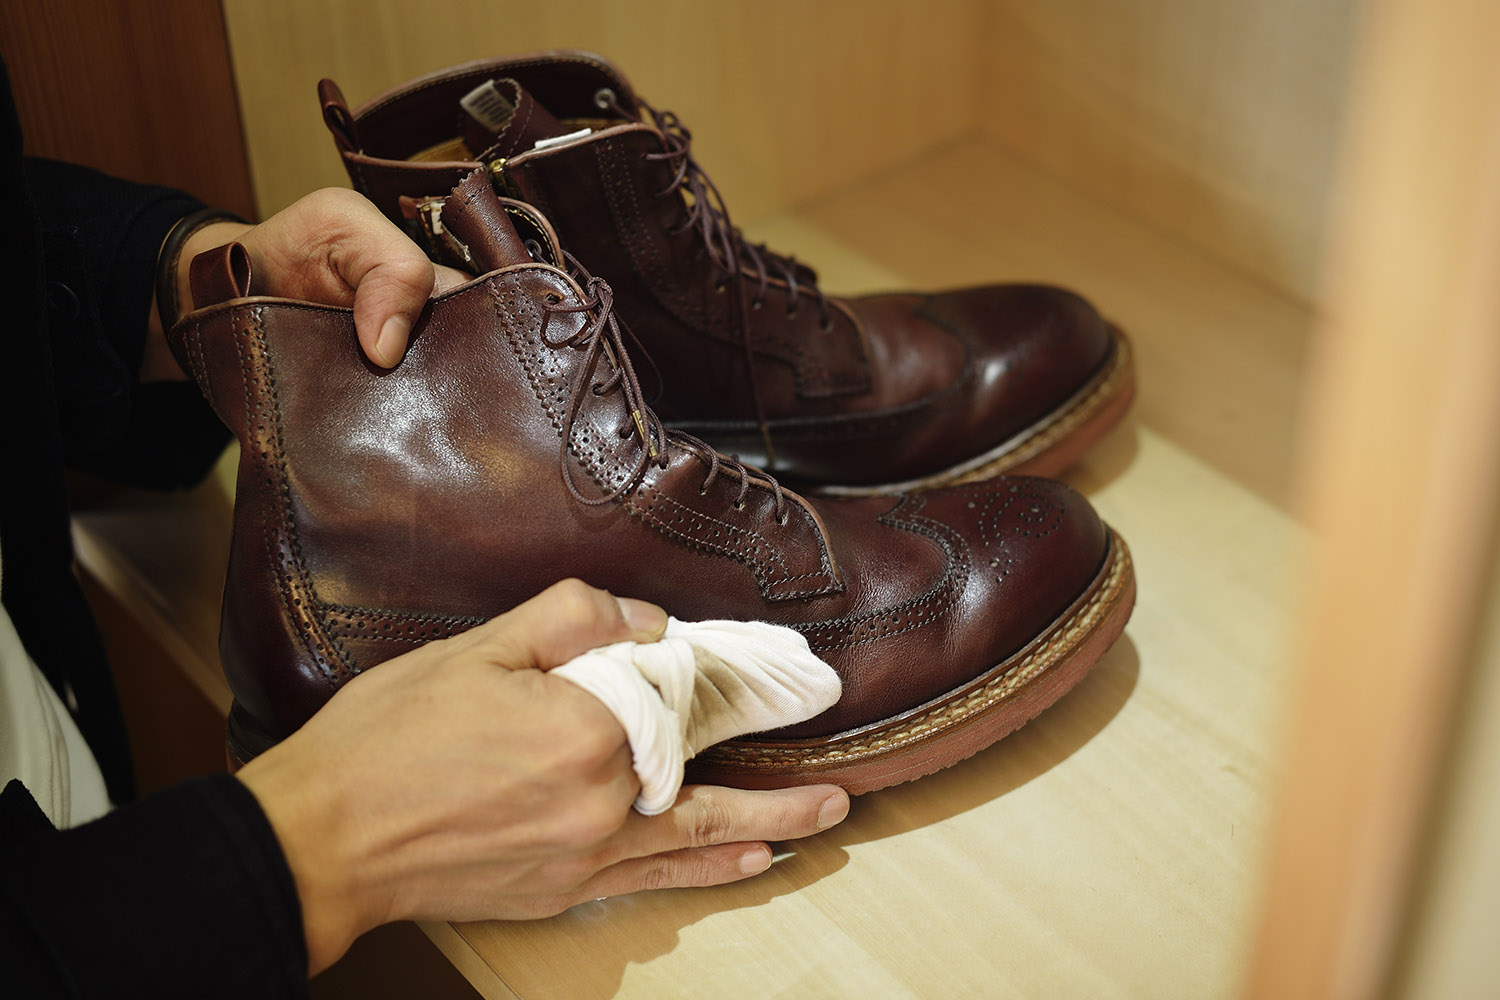 How to Polish Shoes: 3 Easy Steps for Fancy Footwear - The Manual